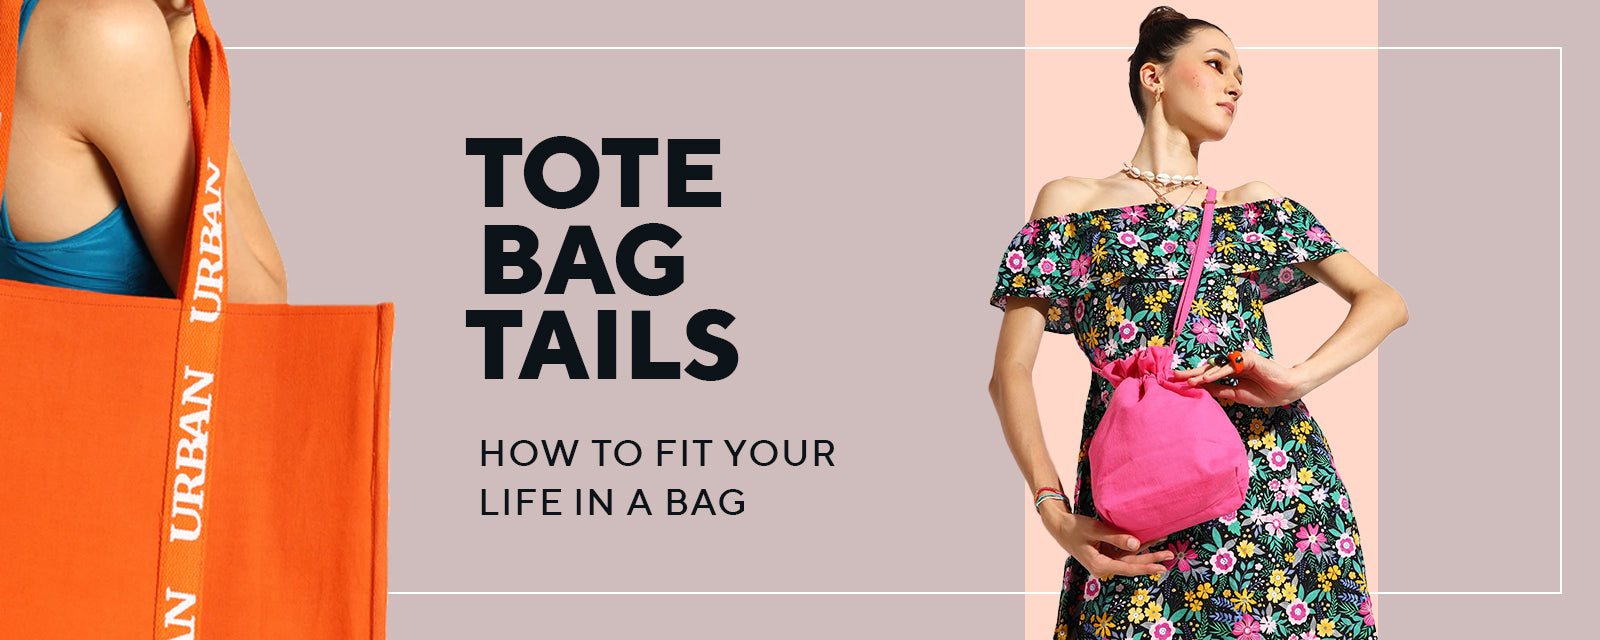 Tote Bag Tails - How to fit your life in a bag